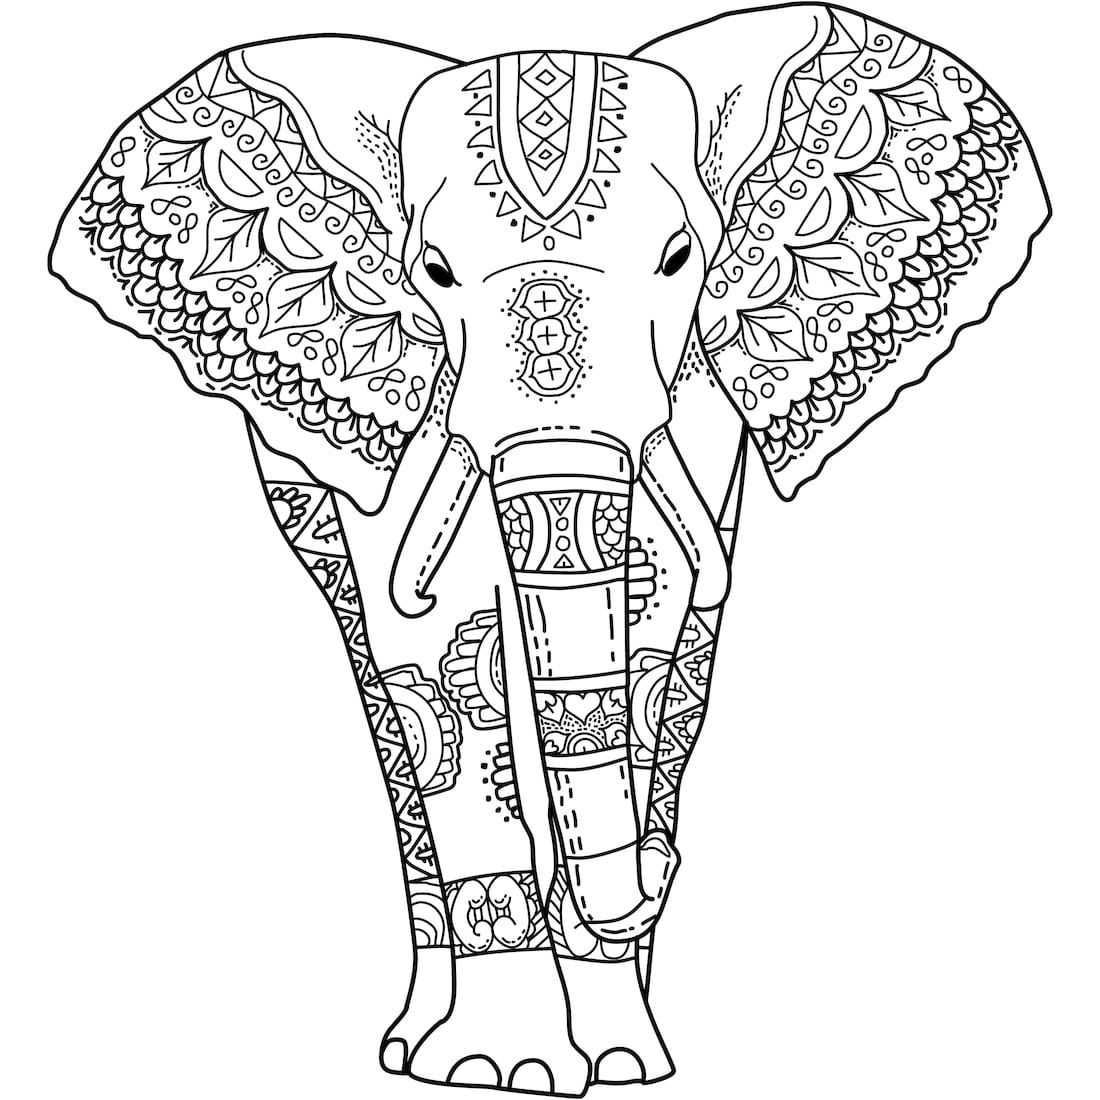 Download Elephant Coloring Pages for Adults - Best Coloring Pages For Kids